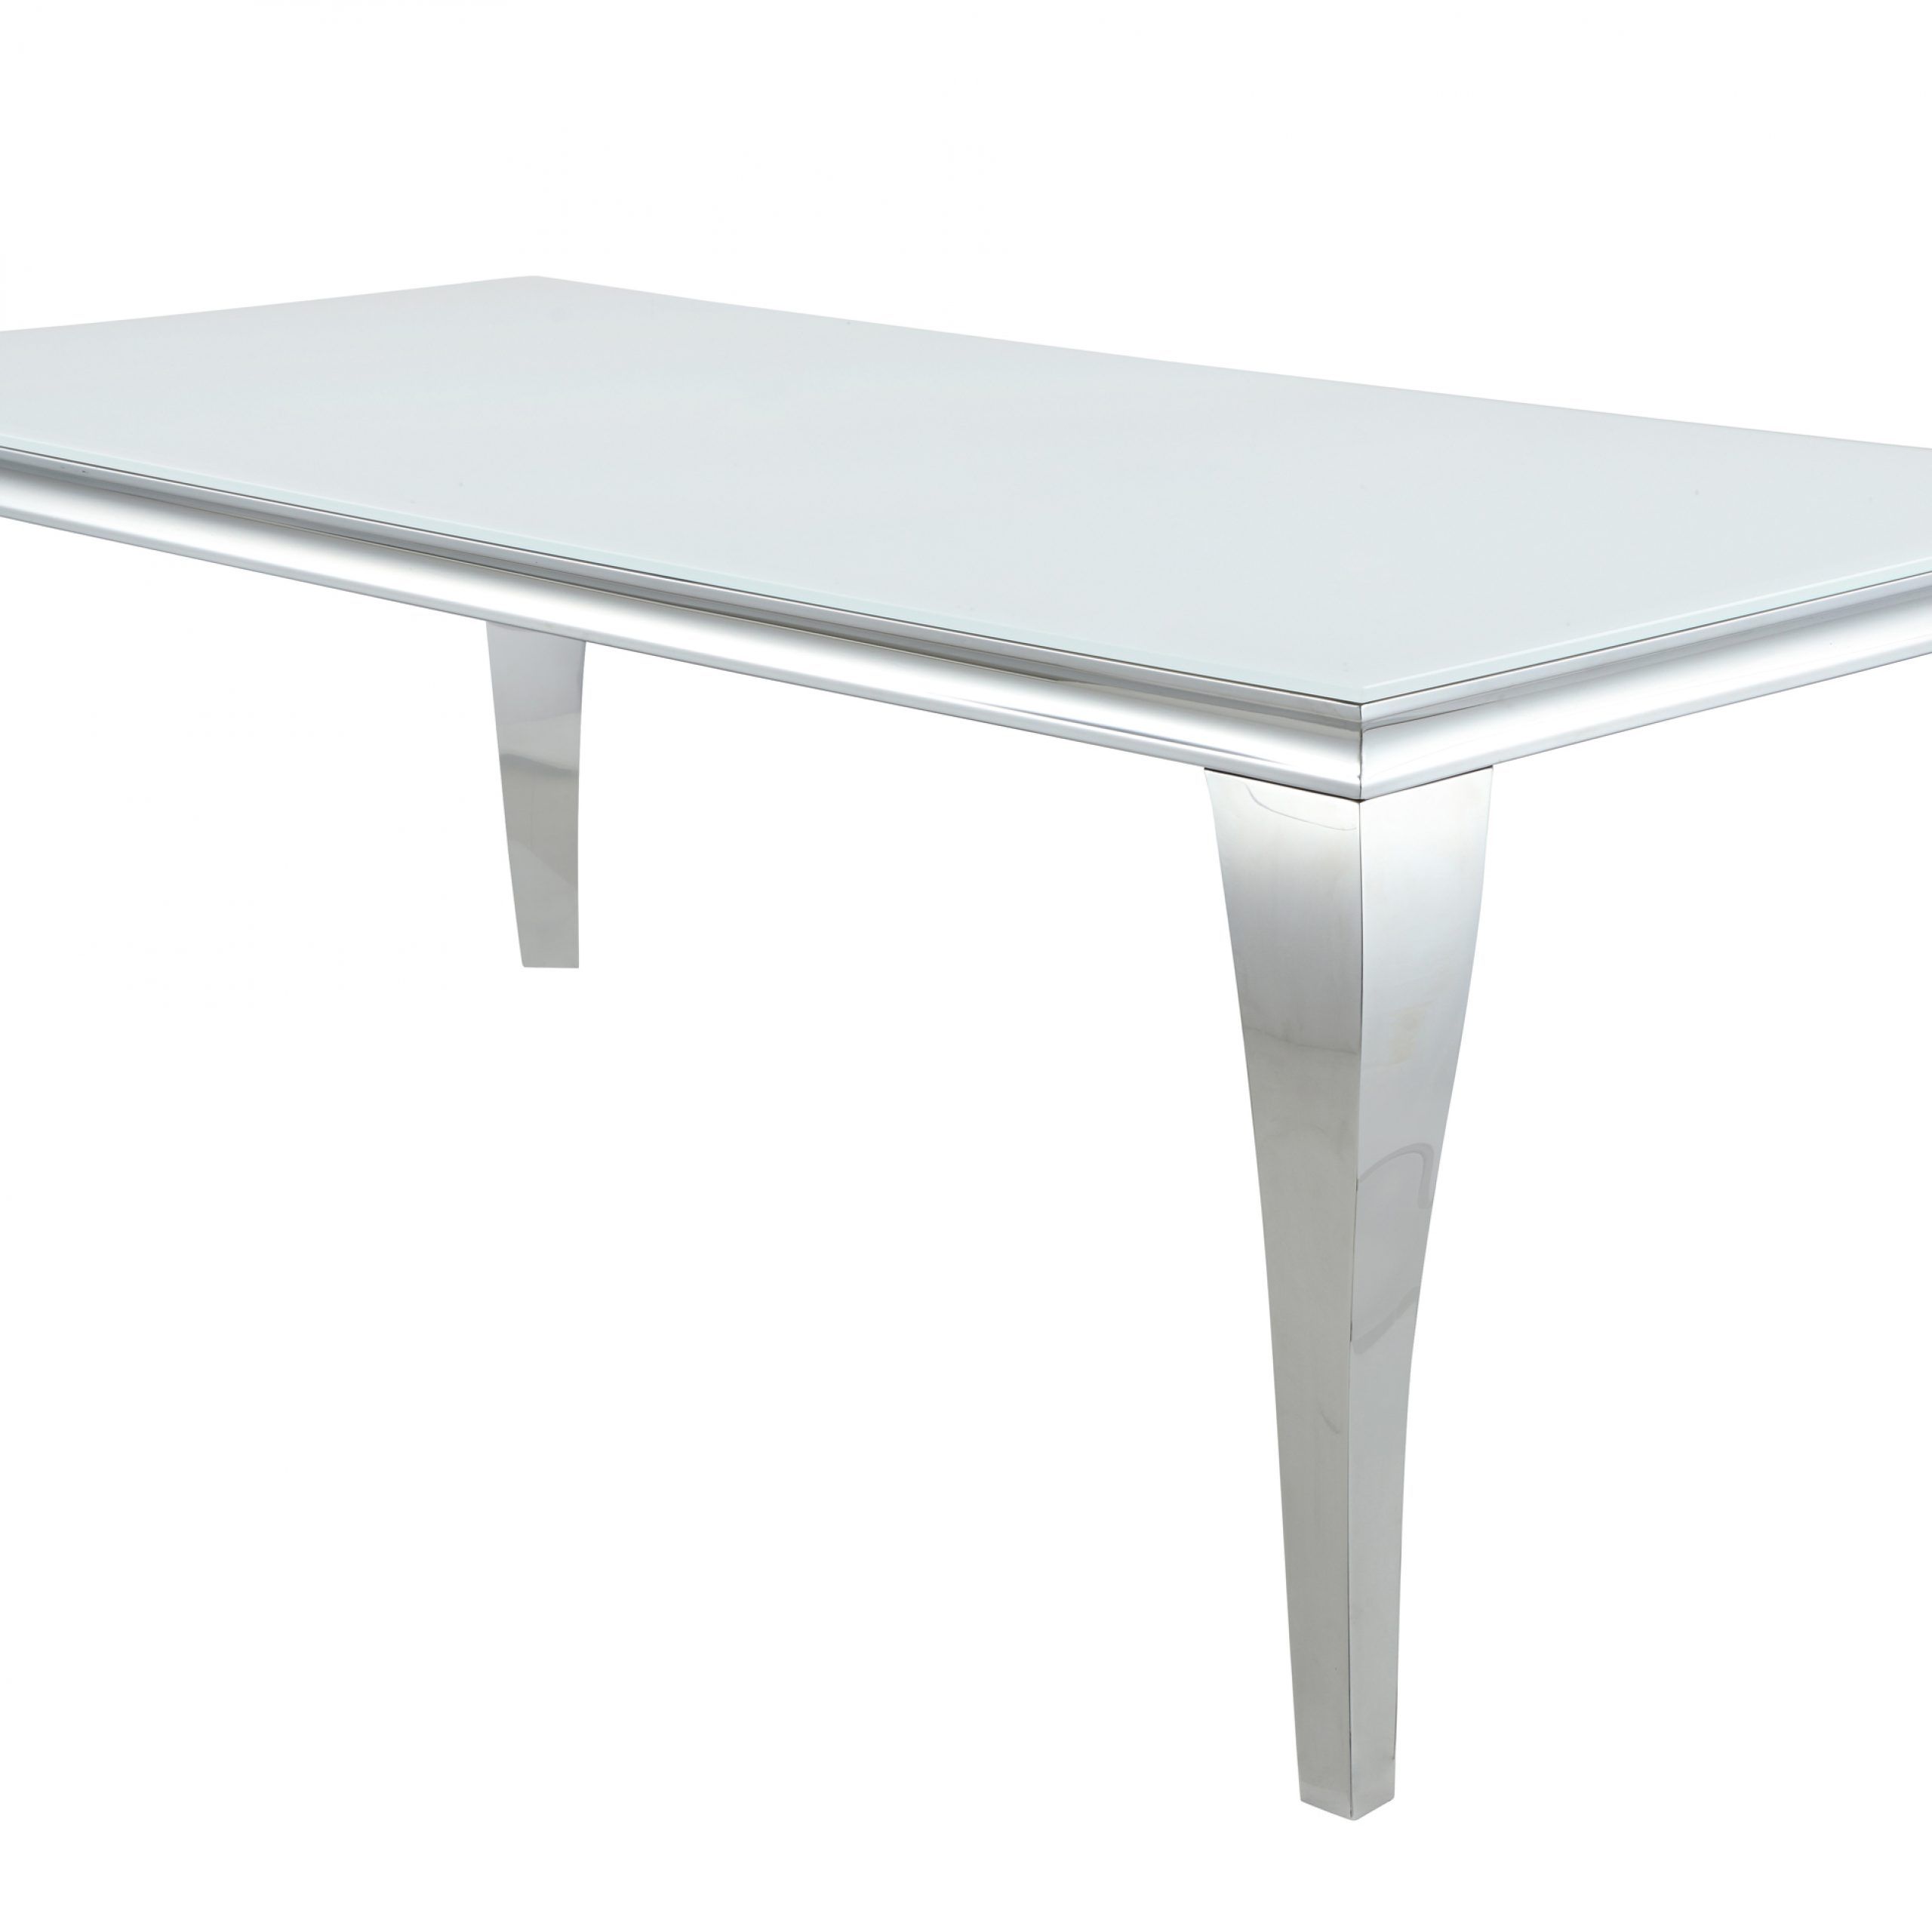 Popular Carone Rectangular Glass Top Dining Table White And Chrome Within White Rectangular Dining Tables (Gallery 19 of 20)